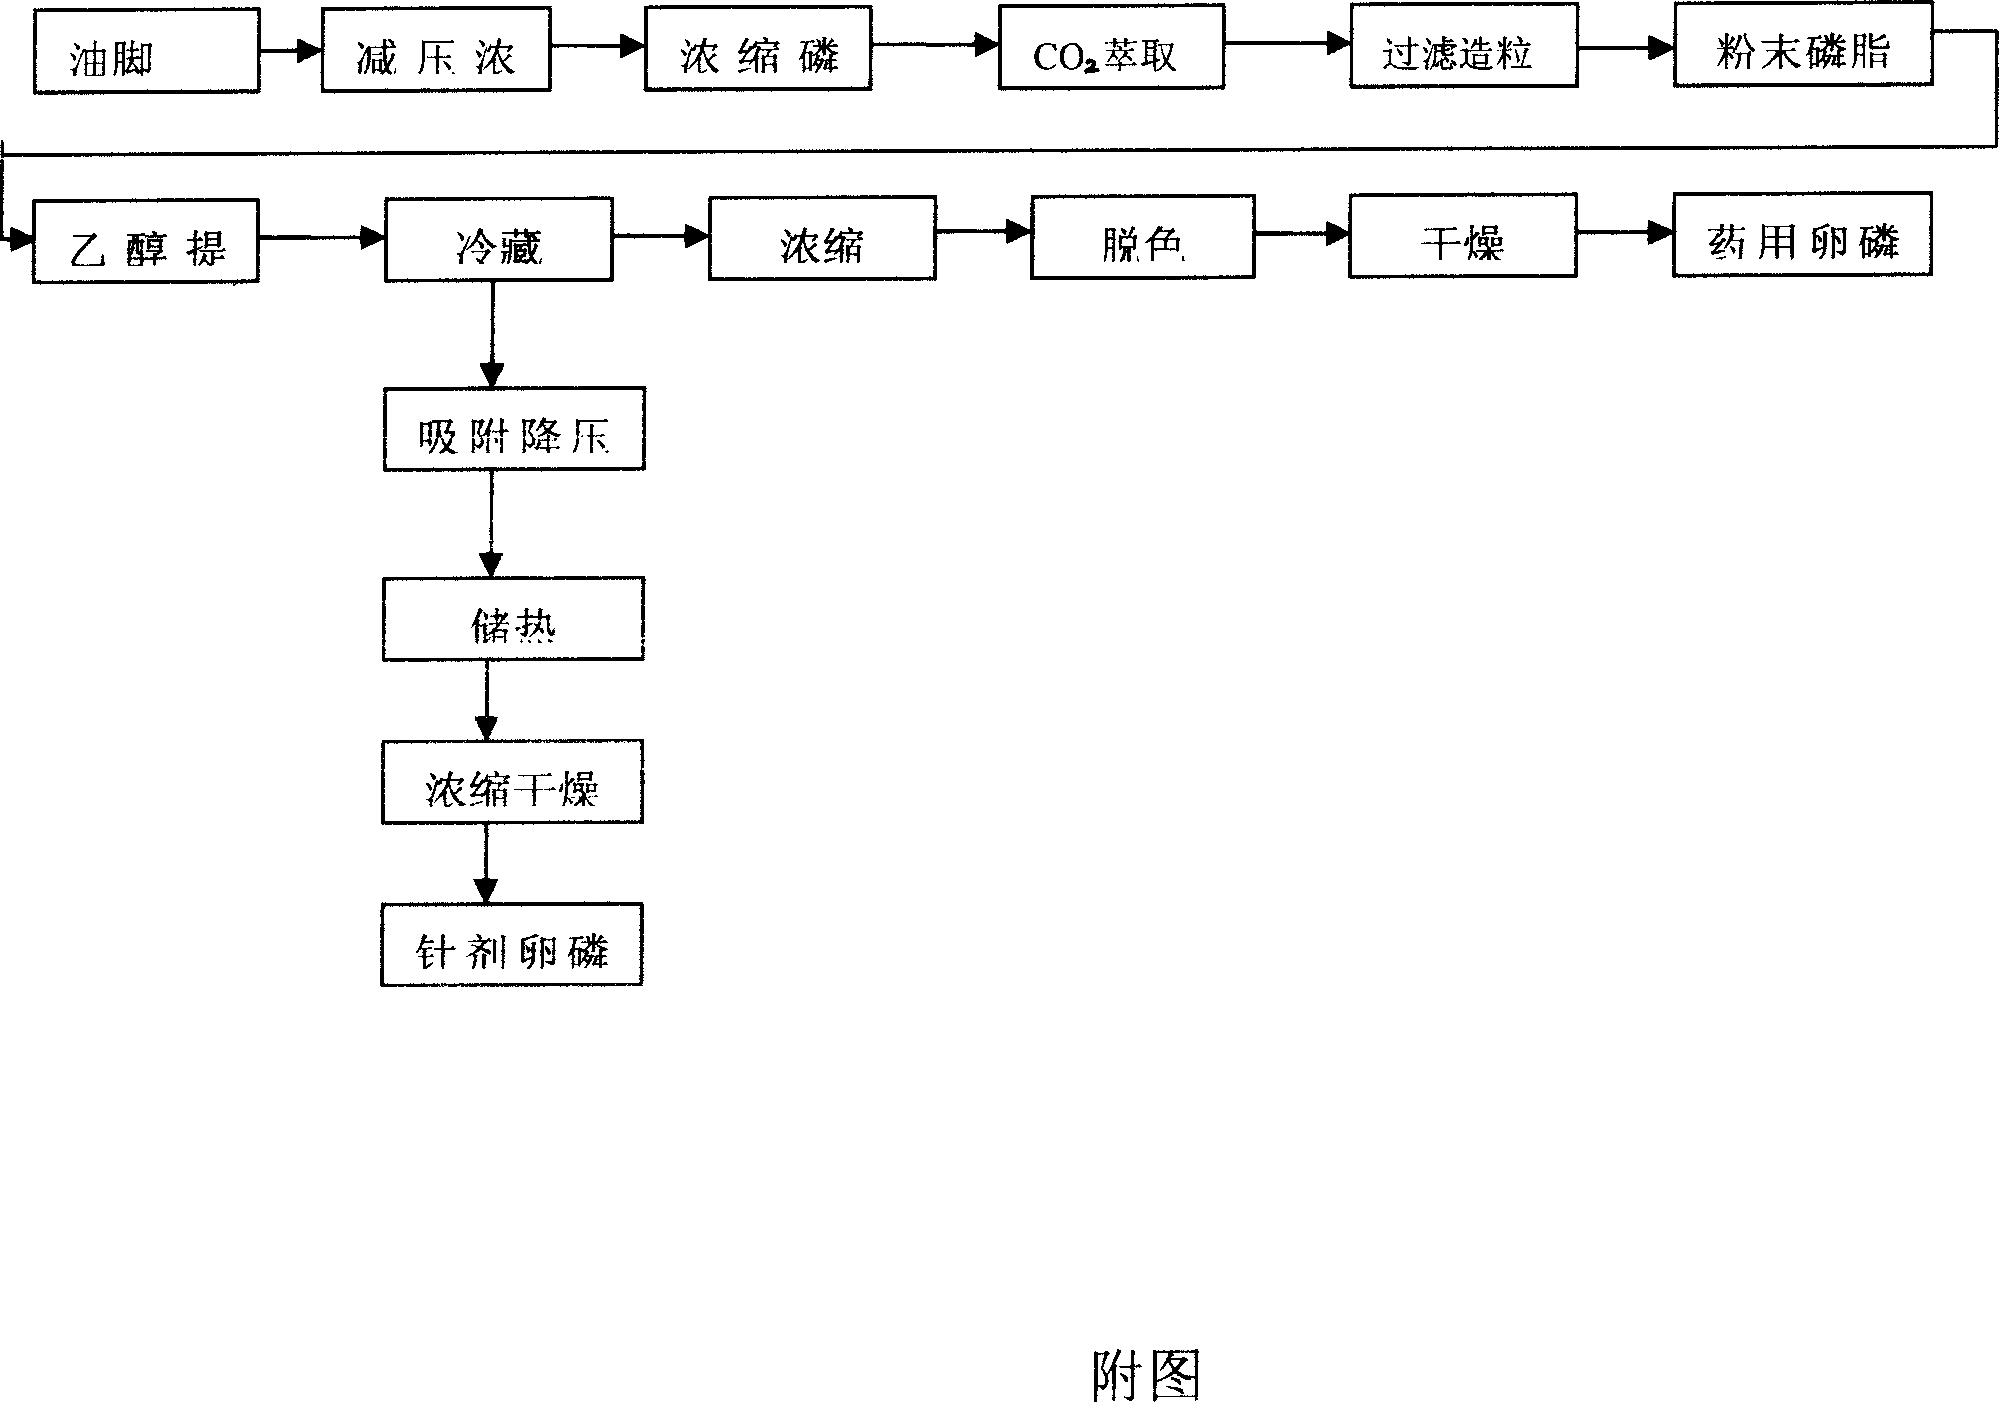 Method of preparing powder phosphatide and lecithin for medicine and injection from soybean oil residue